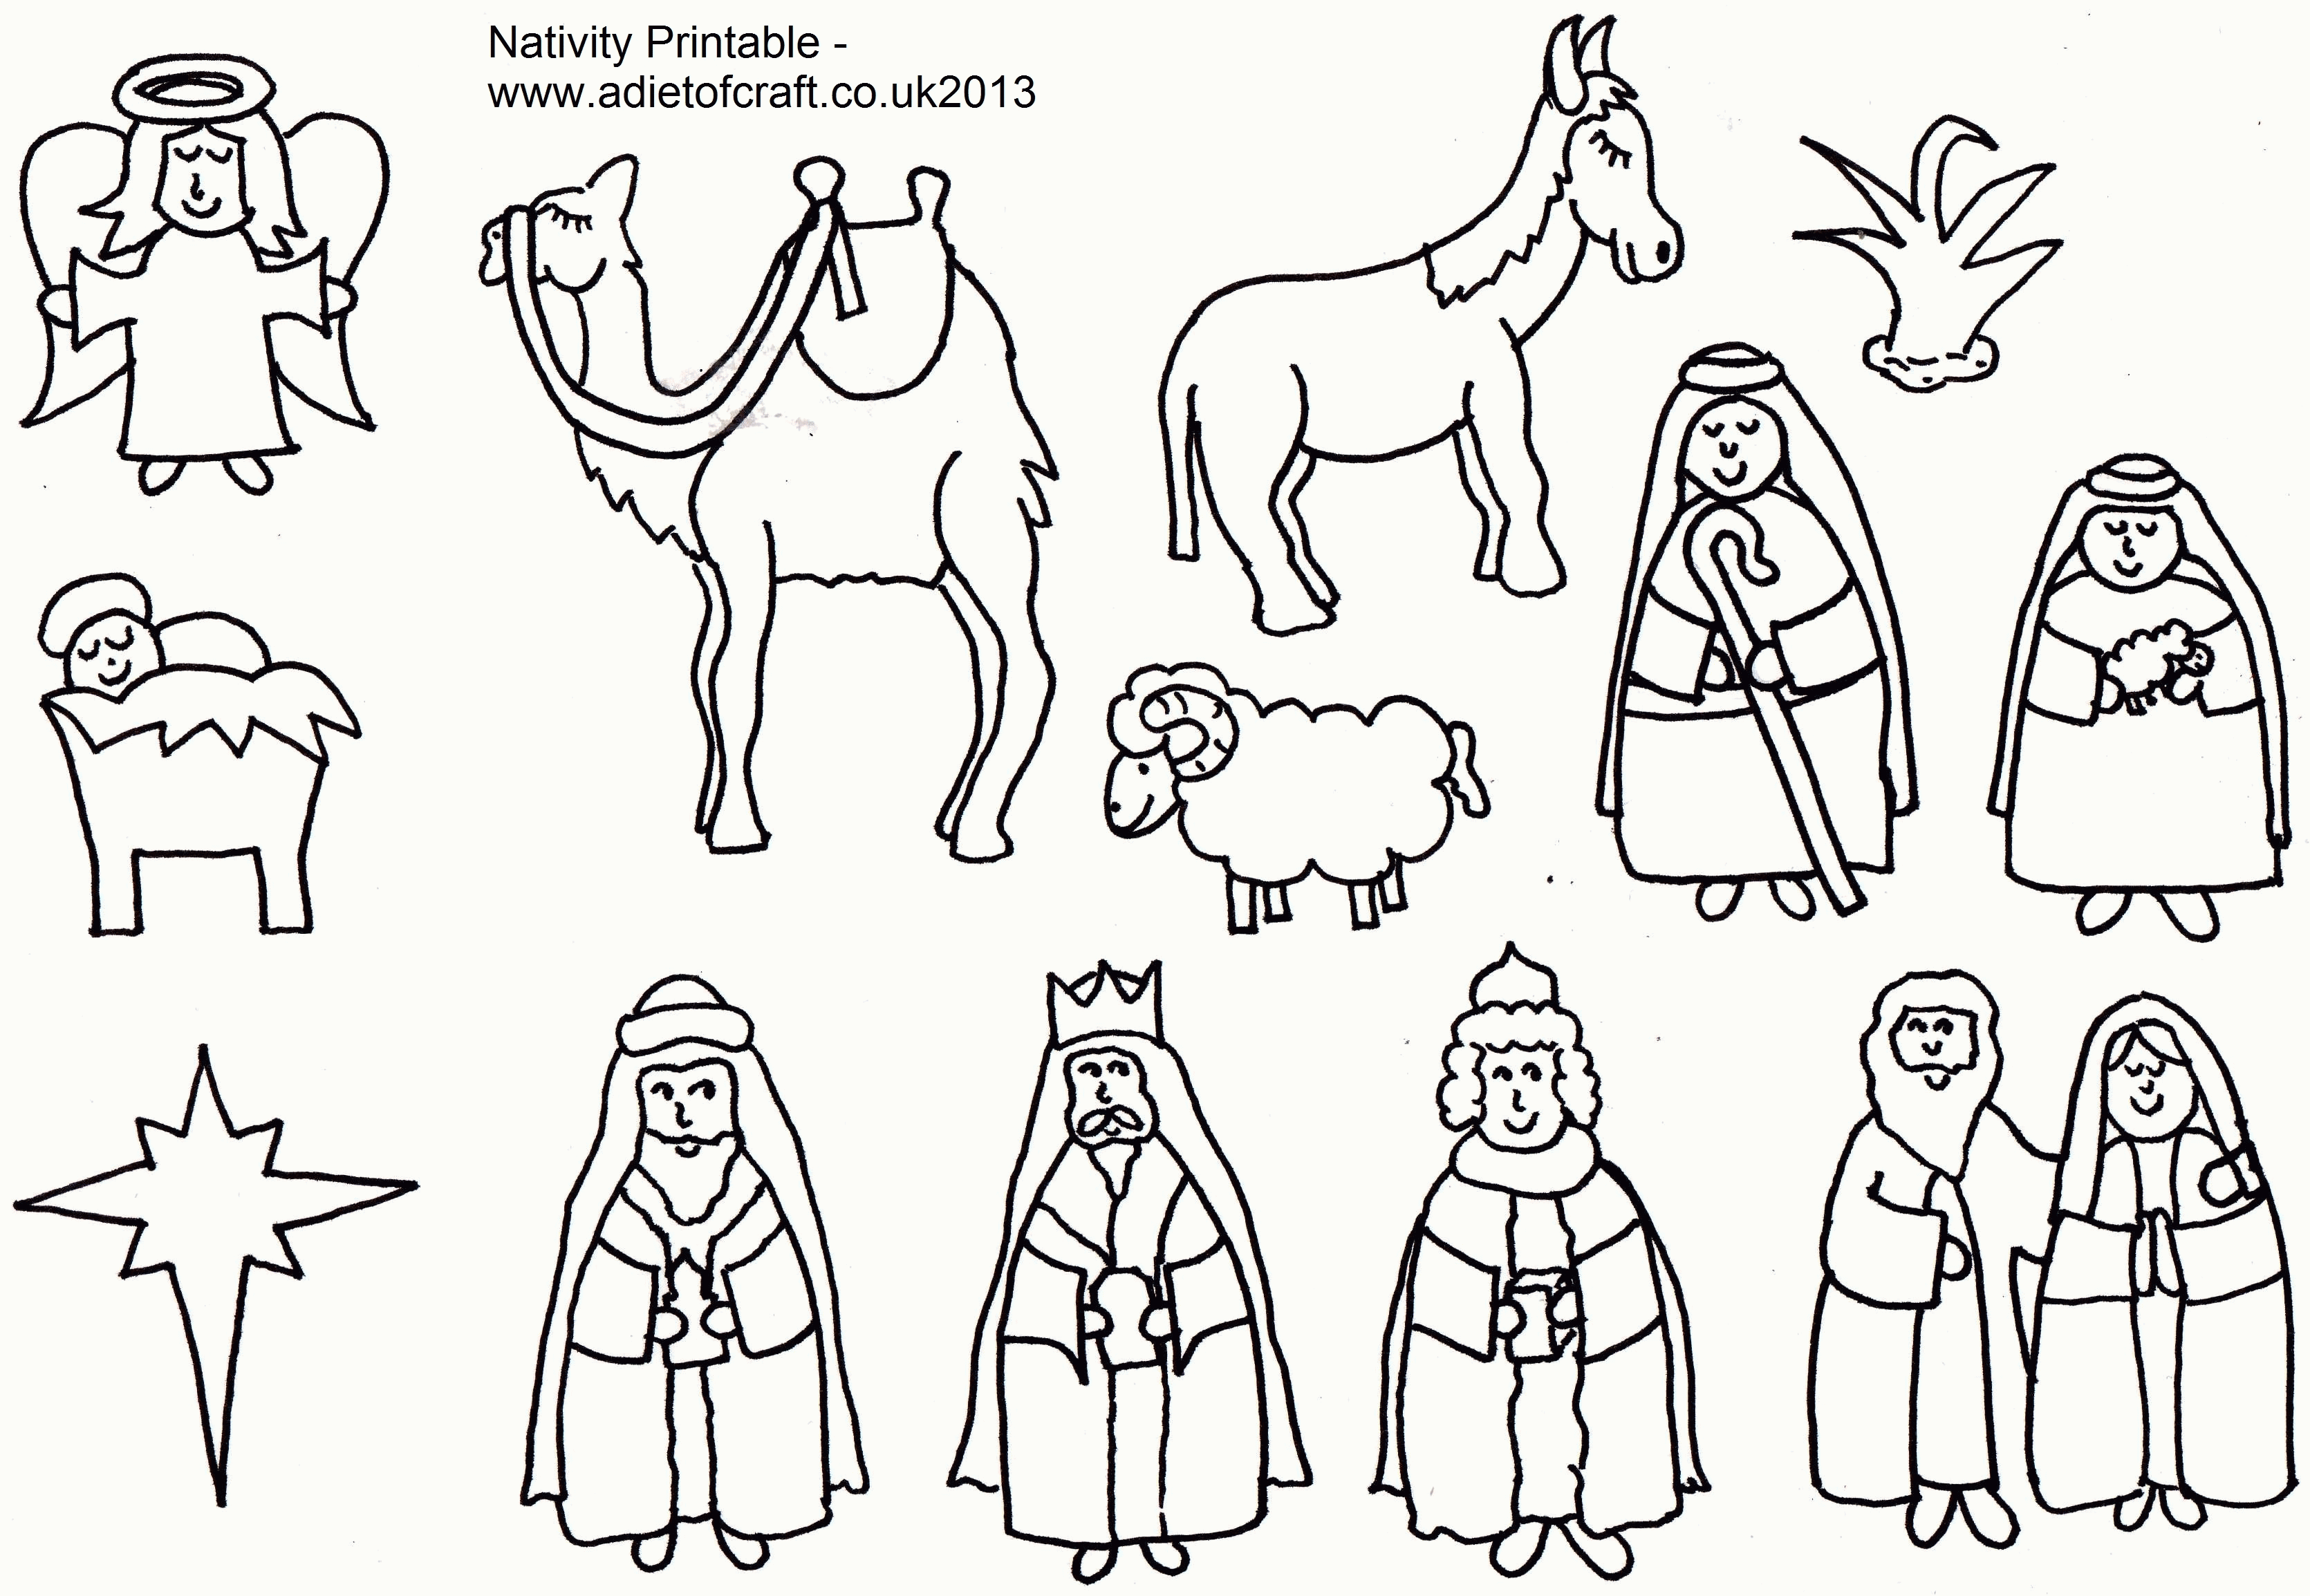 Nativity Coloring Pages (18 Pictures) - Colorine.net | 8268